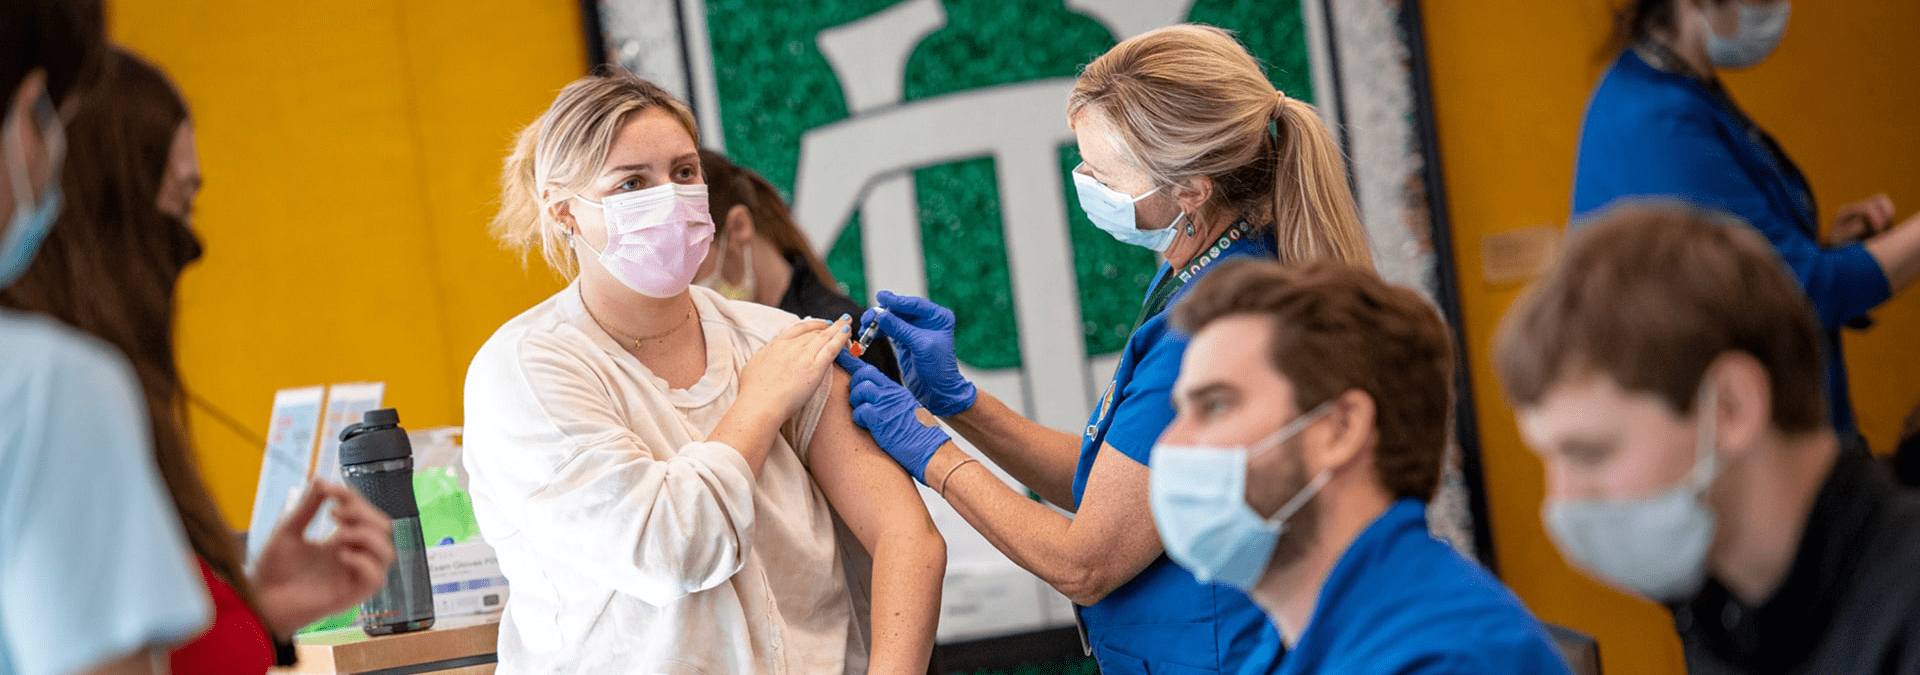 Tulane Health Center giving vaccines to students